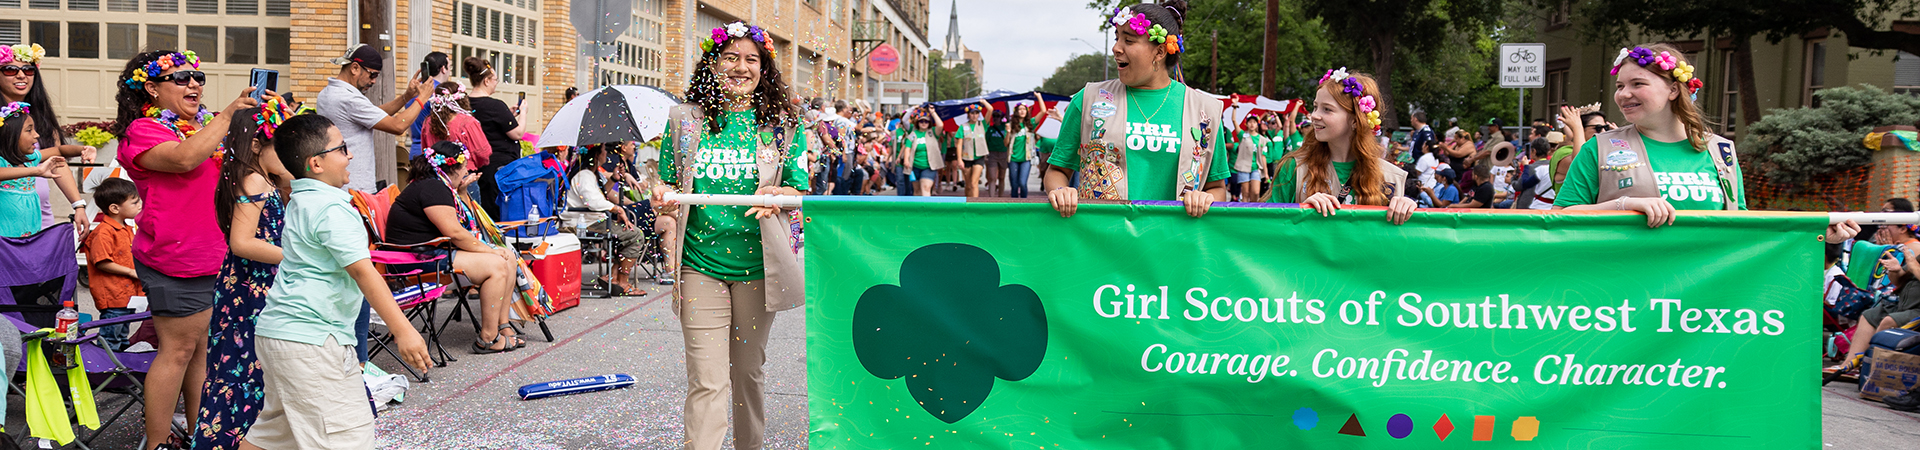  Girl Scouts smiling and holding a green banner in the battle of flowers parade while a boy throws confetti on them 